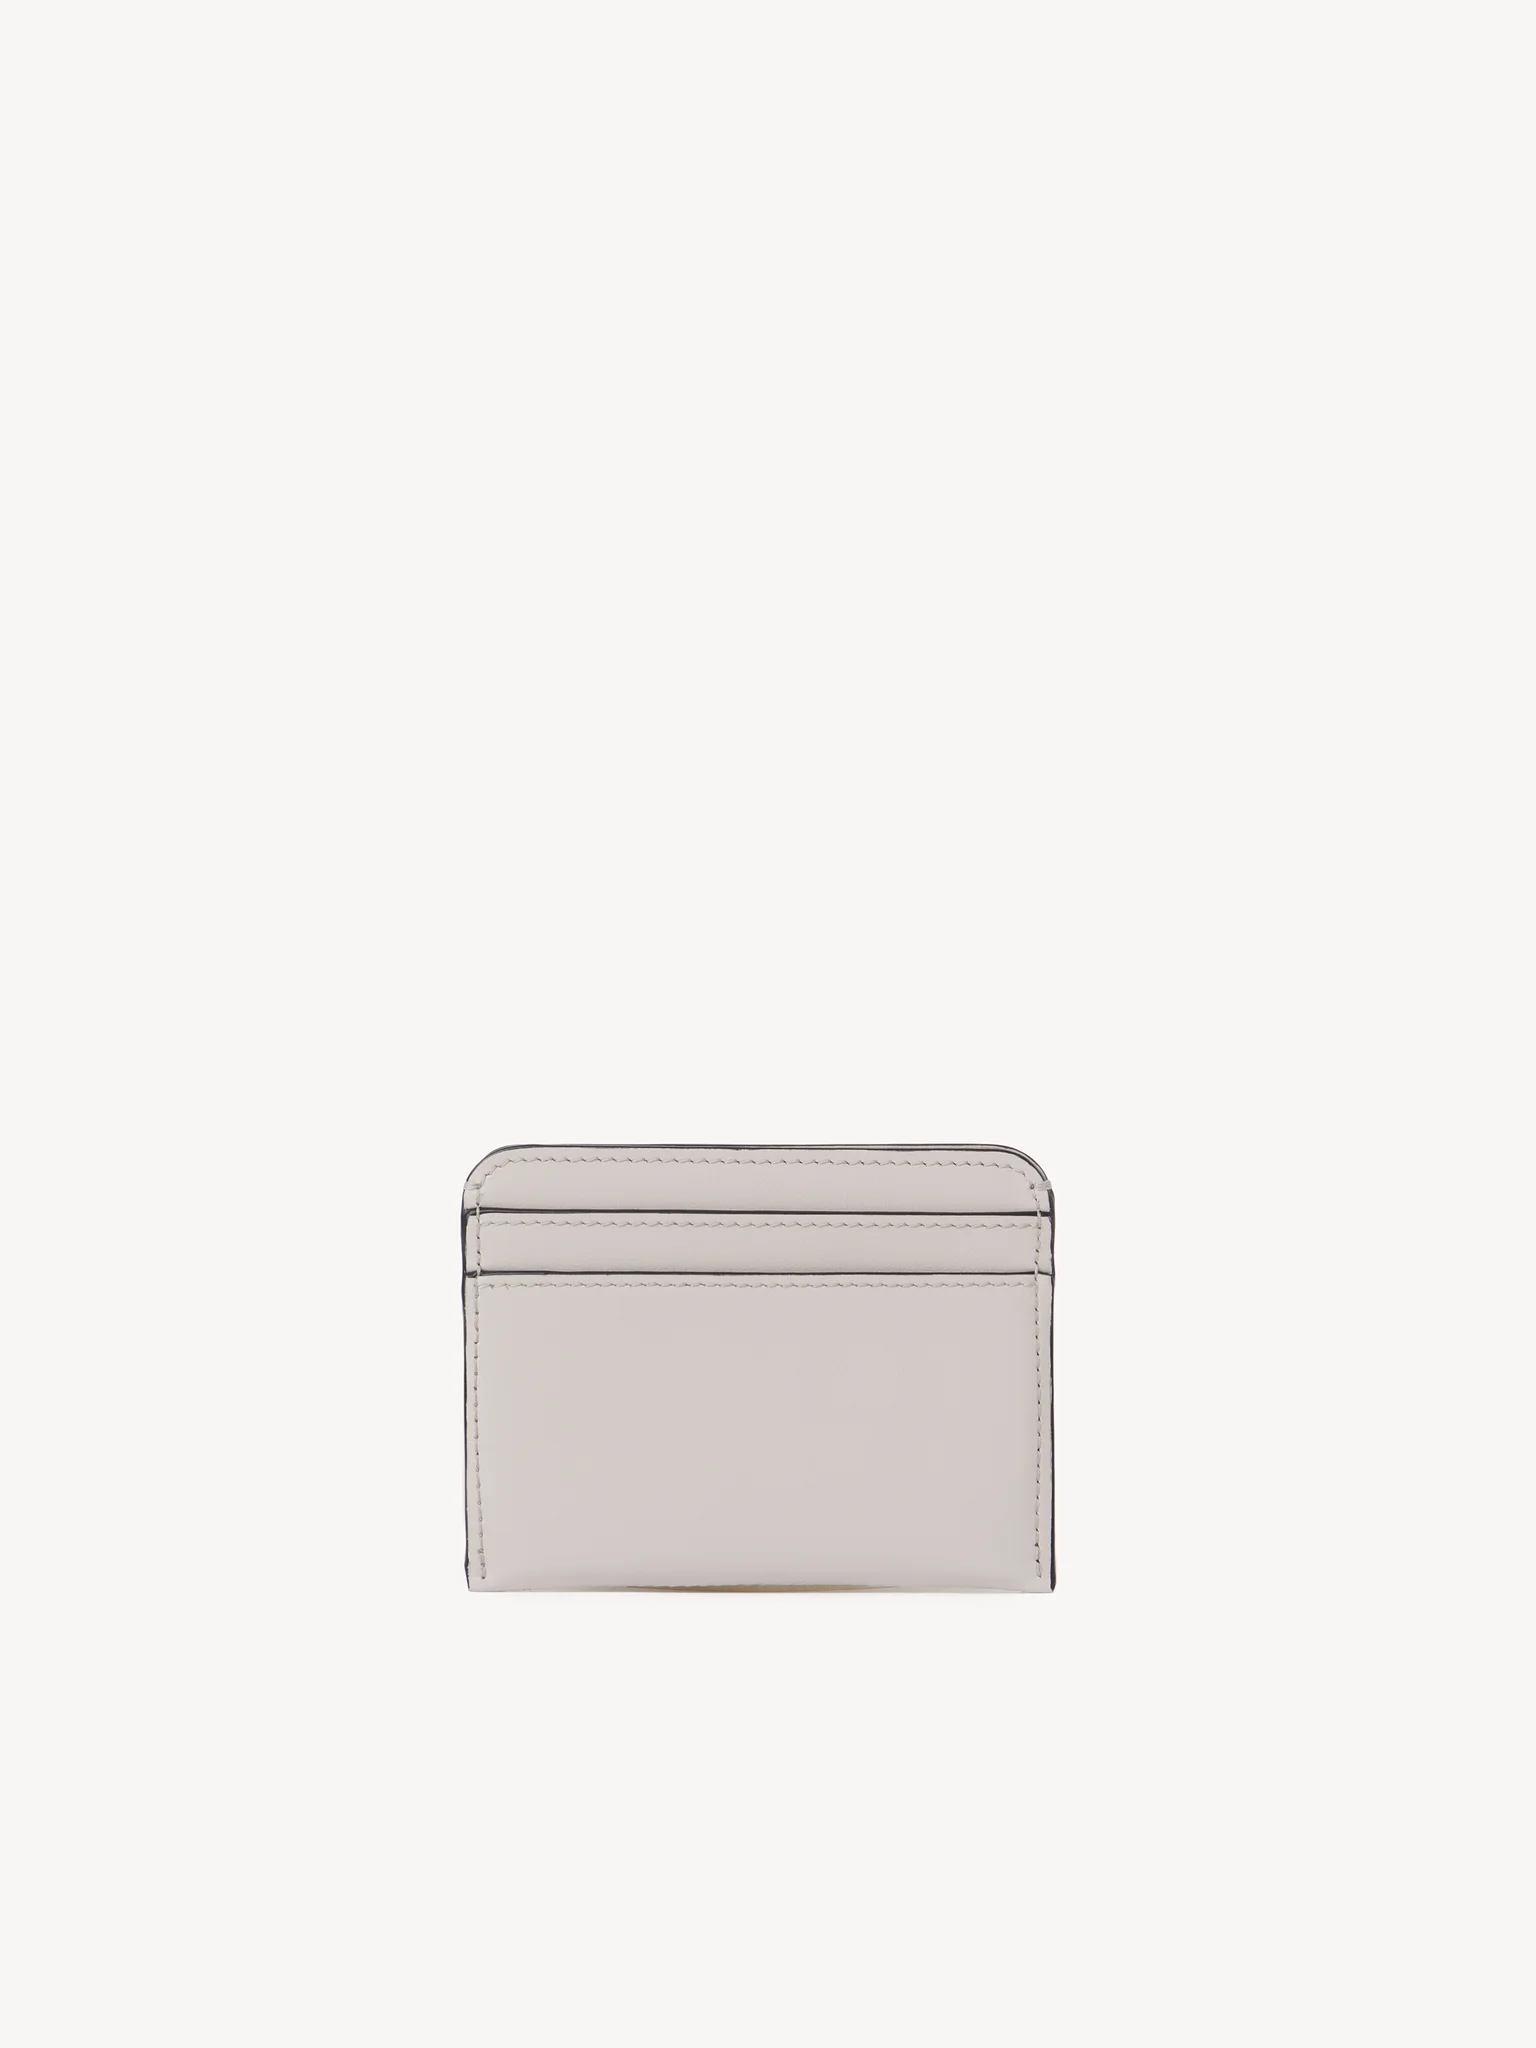 Chloe Sense Cardholder in Silver available at TNT The New Trend Australia.